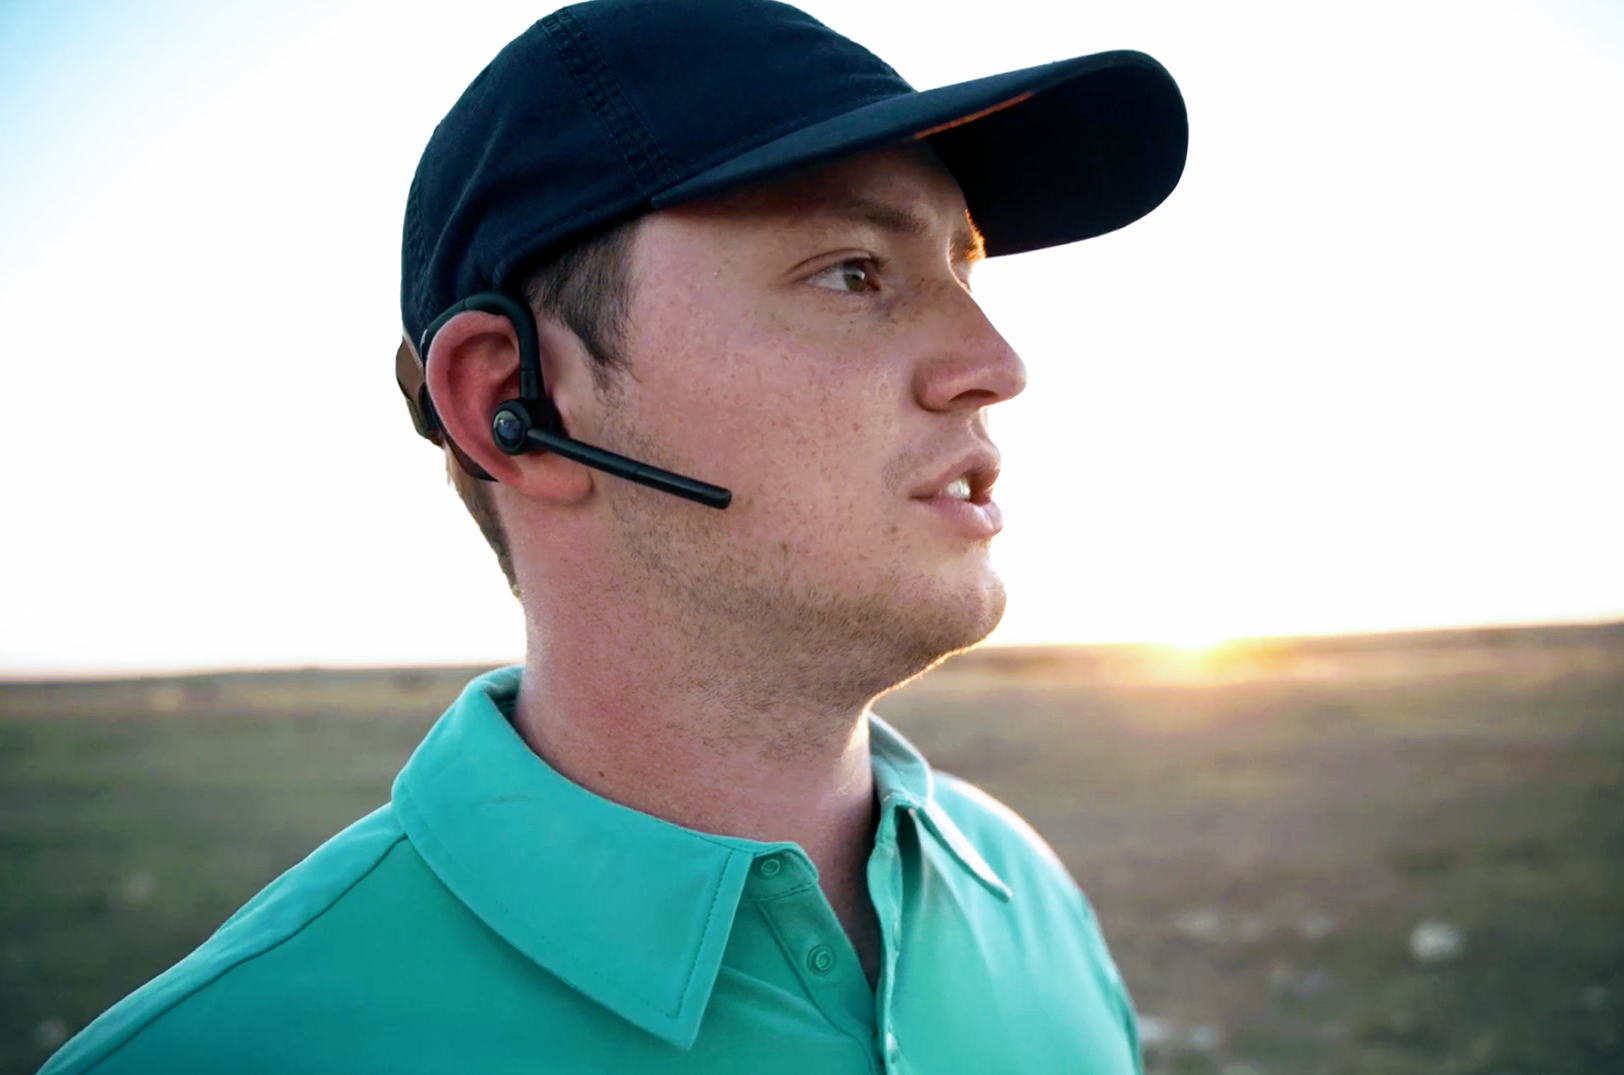 In the field: Industry-specific, hands-free voice tech helps ‘hero up’ data collecting workers